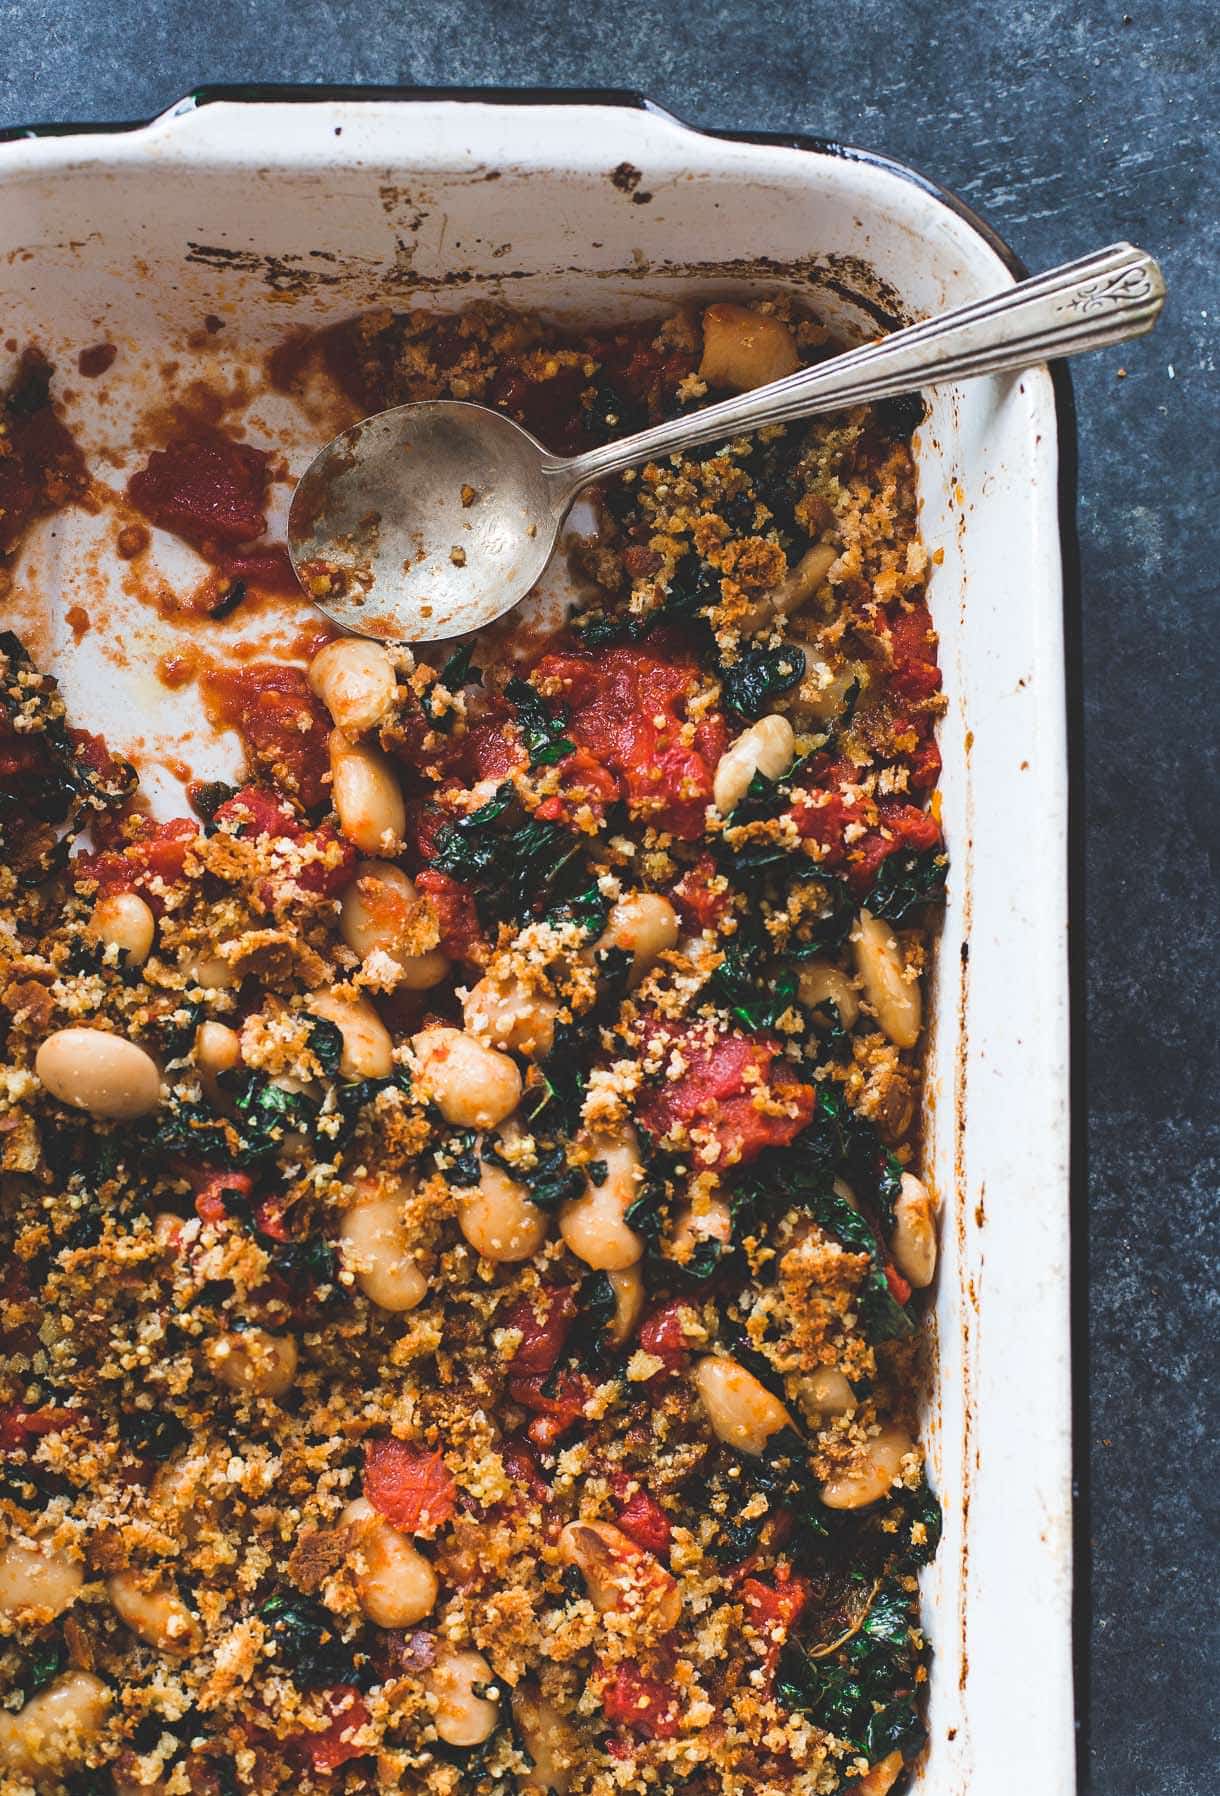 Cozy Gluten-Free Gratin with Butter Roasted Tomatoes, Beans and Kale